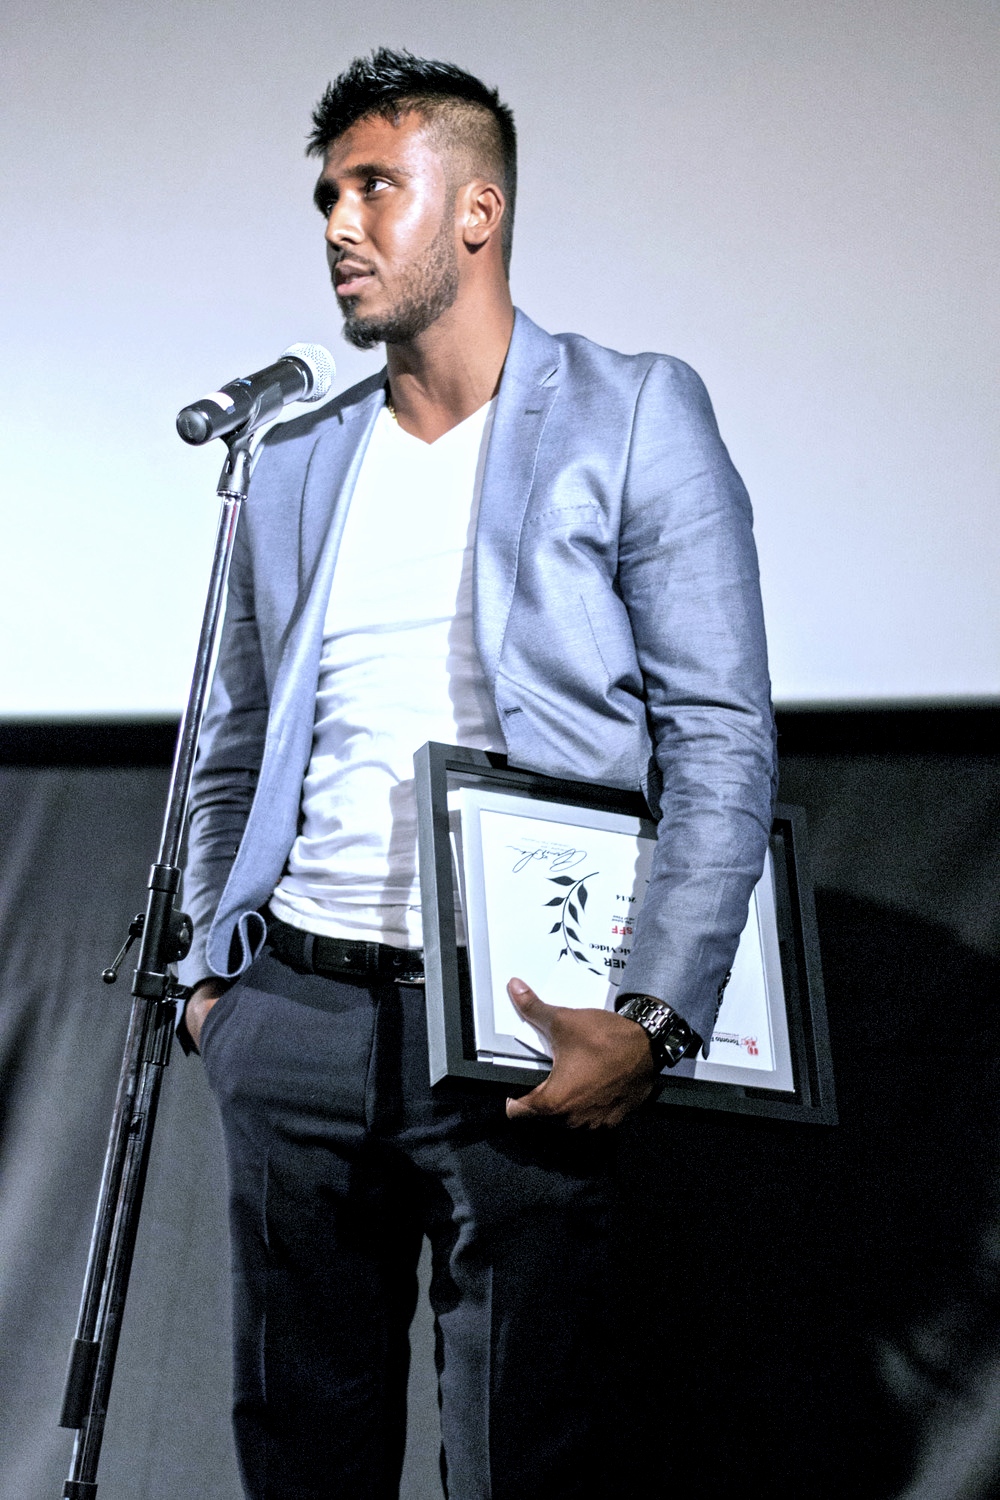 At the 2nd Annual TFsFF ( Toronto Film School Festival of Films) receiving the 2014's Best Music Video Award for Formula Rush